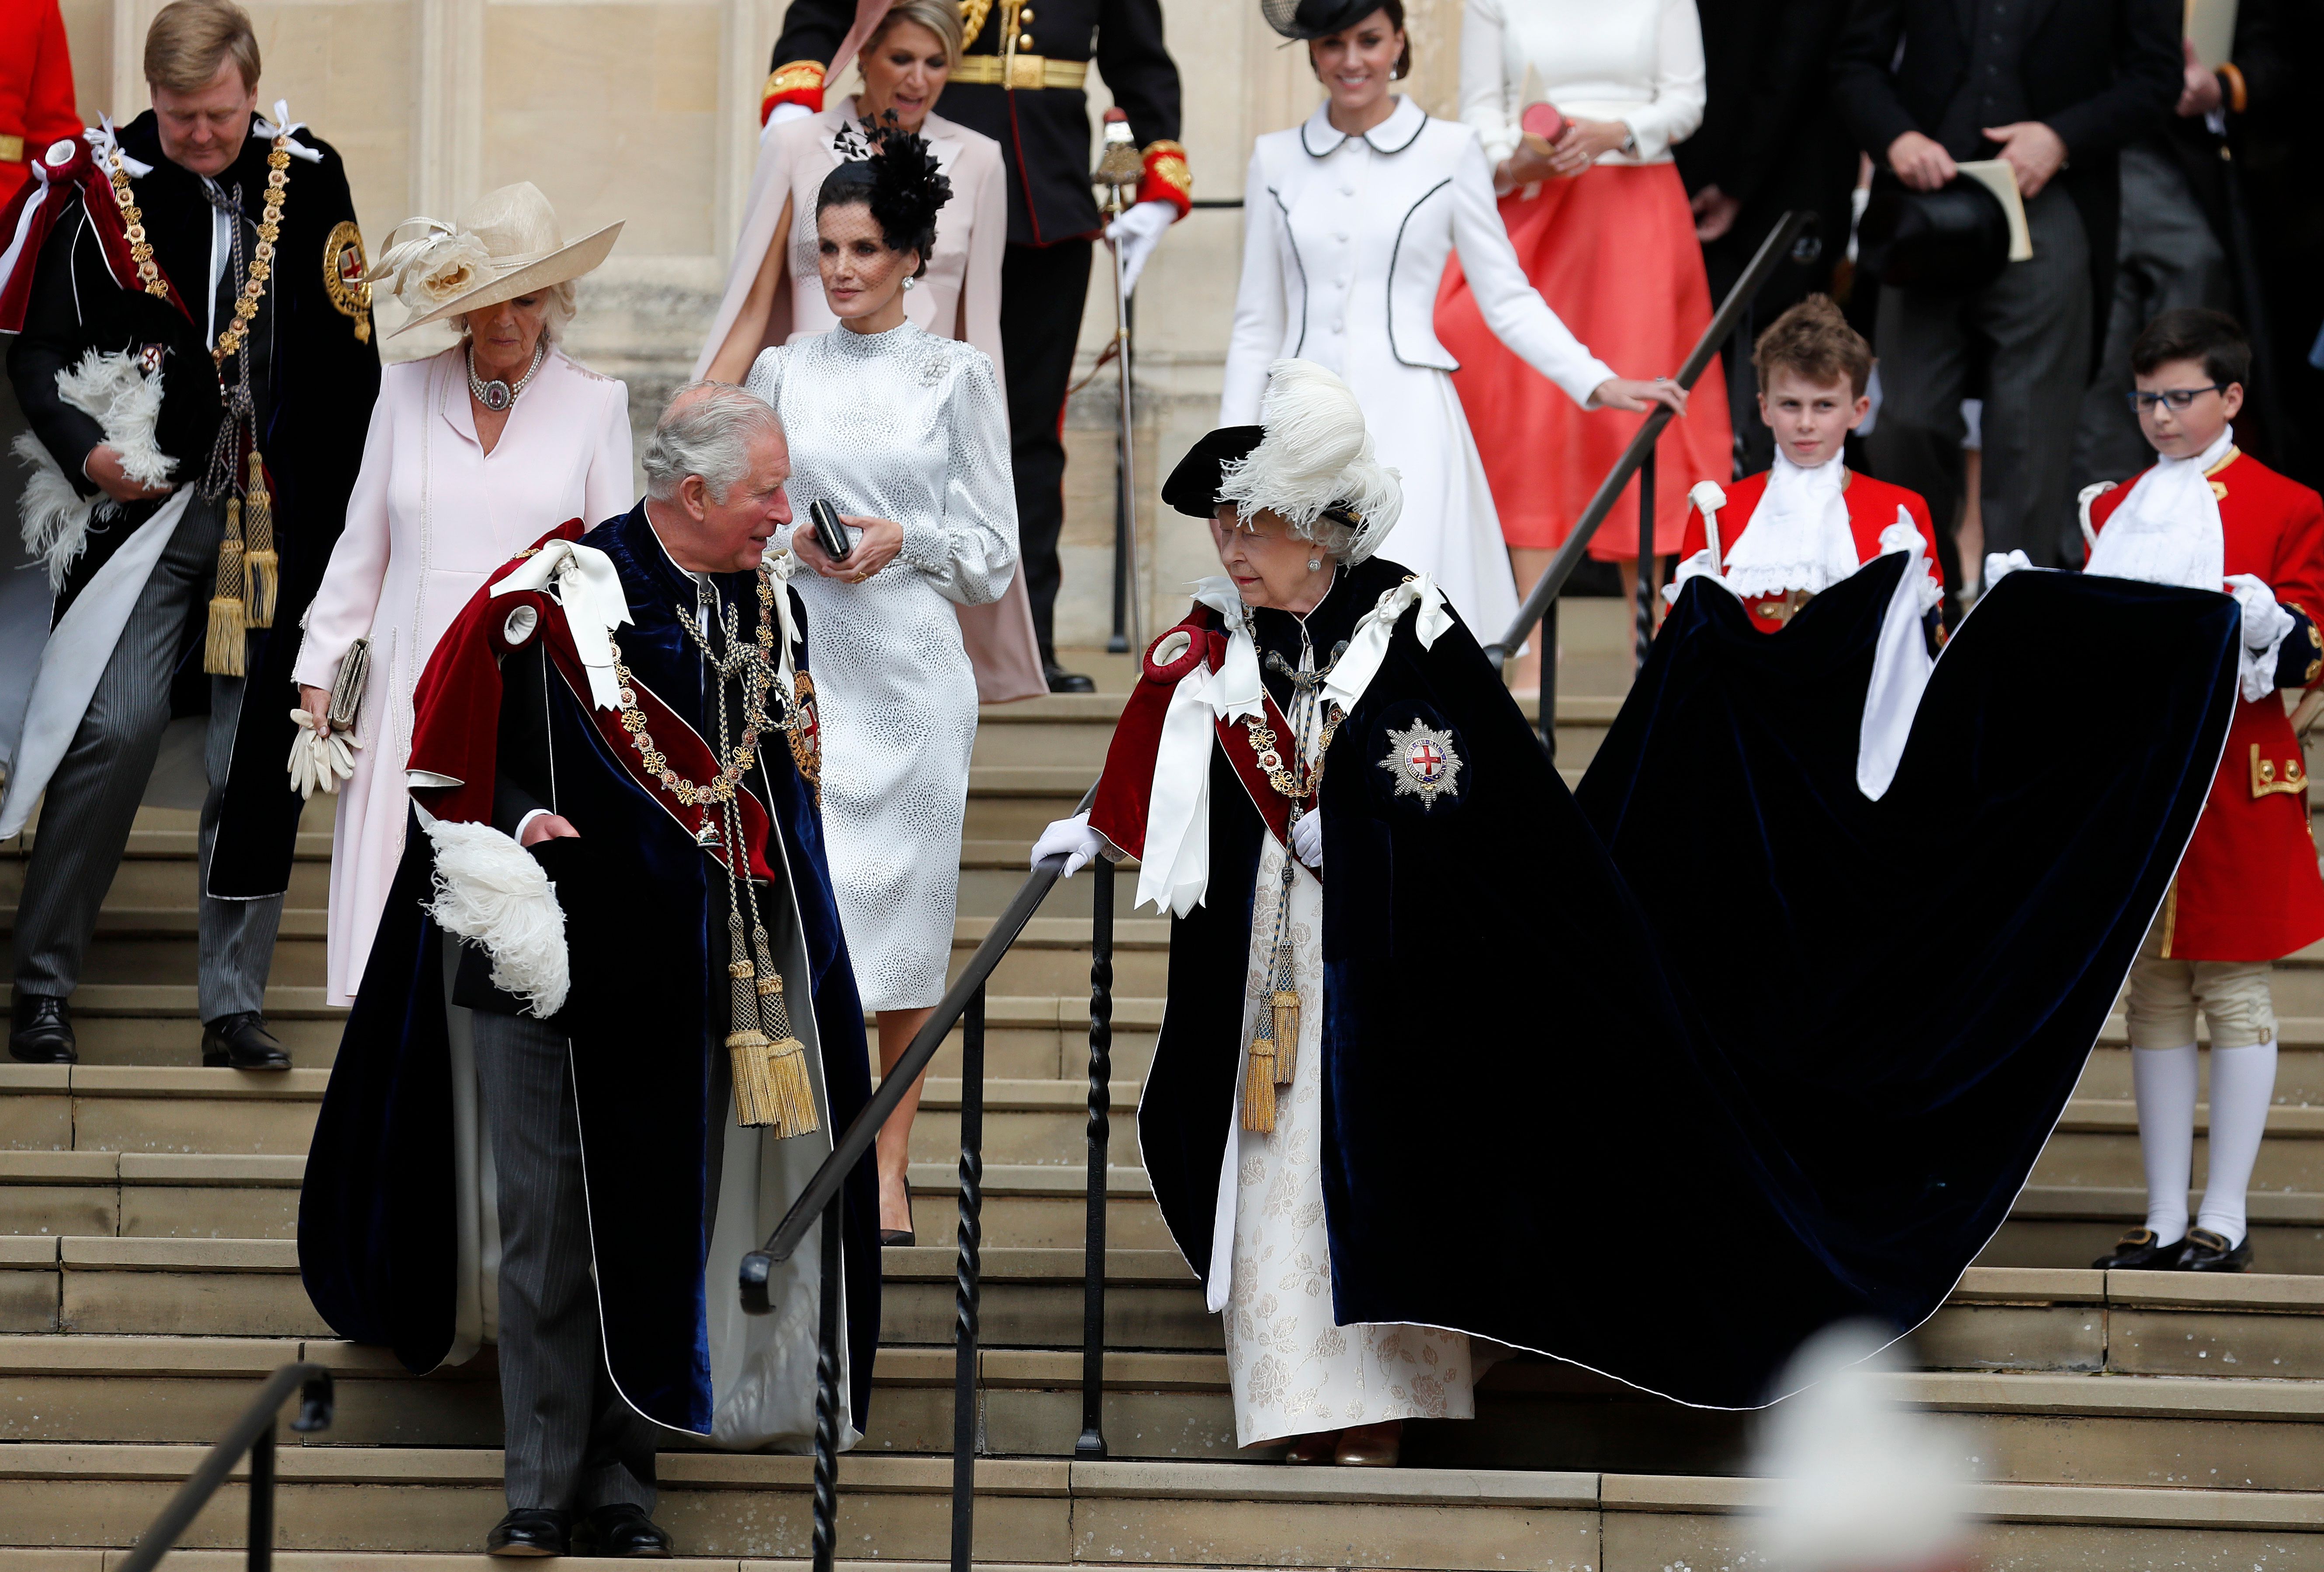 Every Photo from the Order of the Garter Service 2019